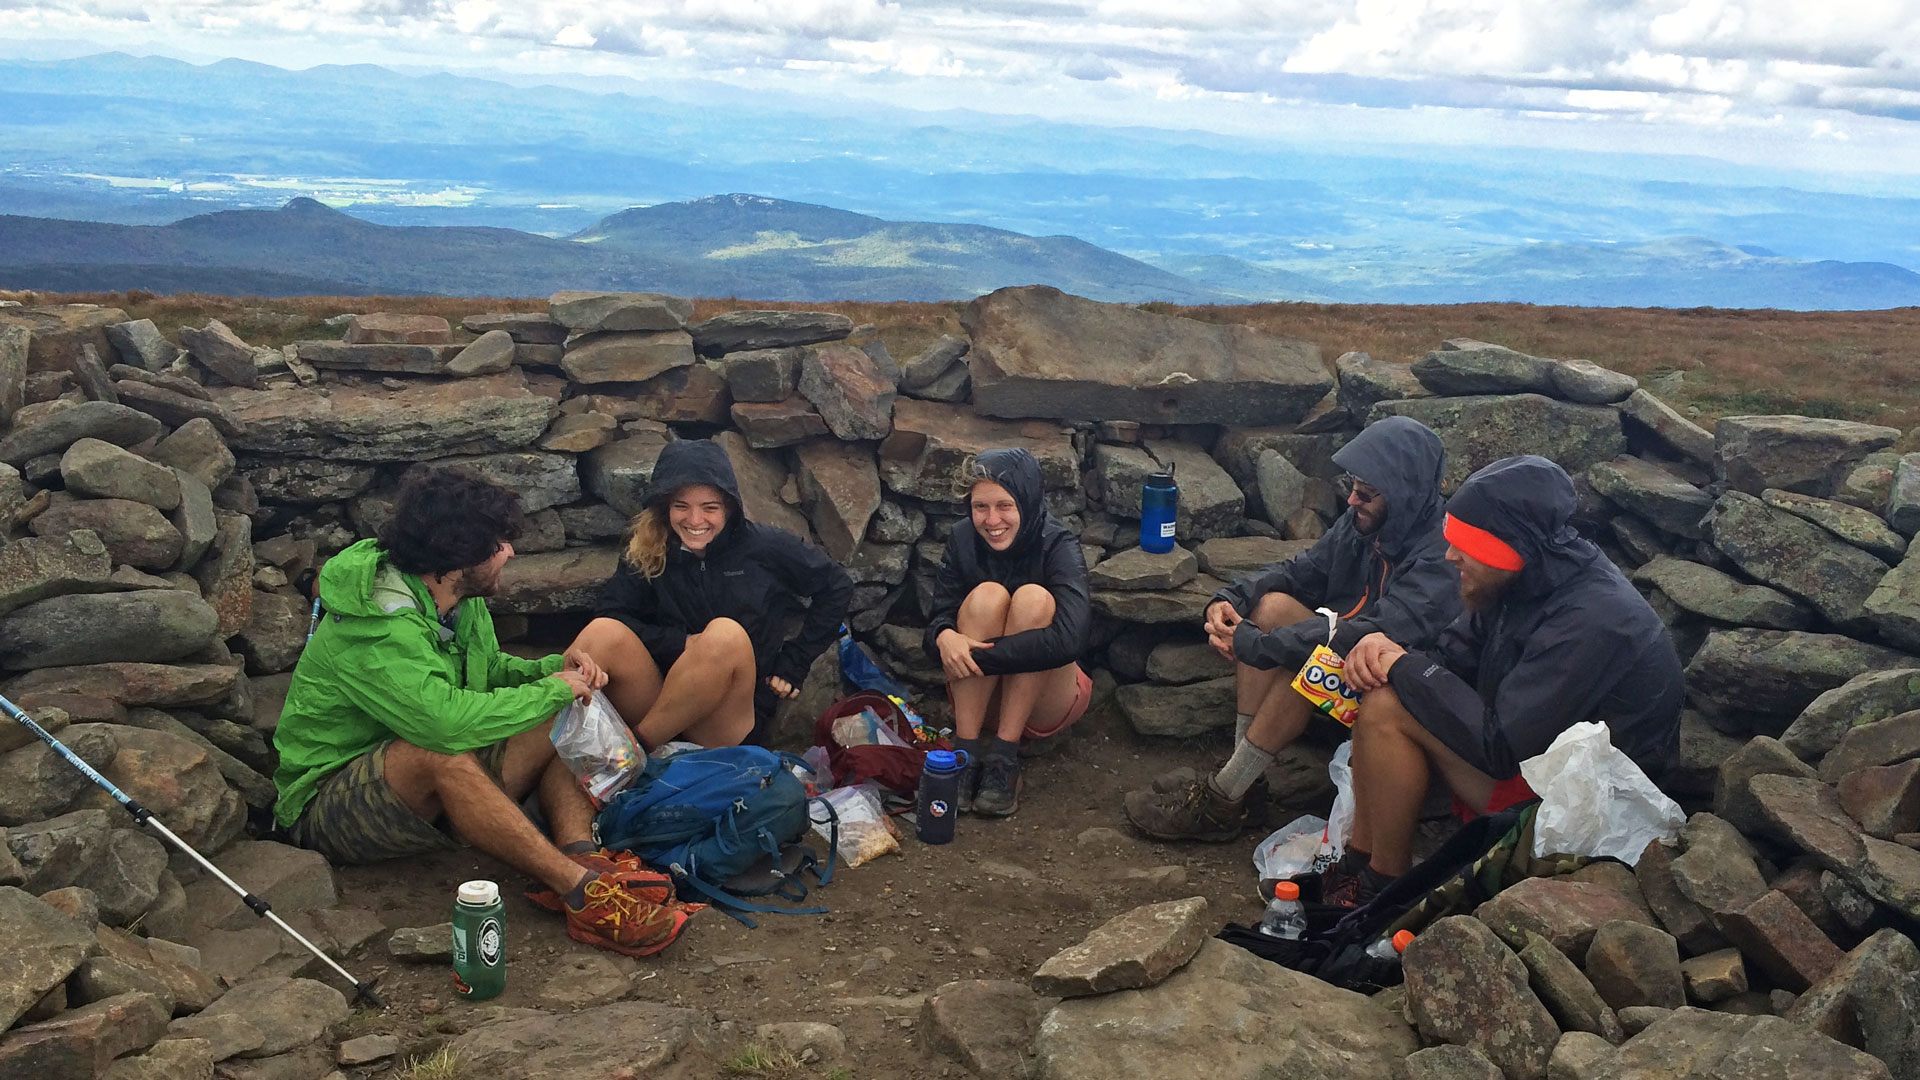 Group of hikers enjoy snacks on a mountain summit